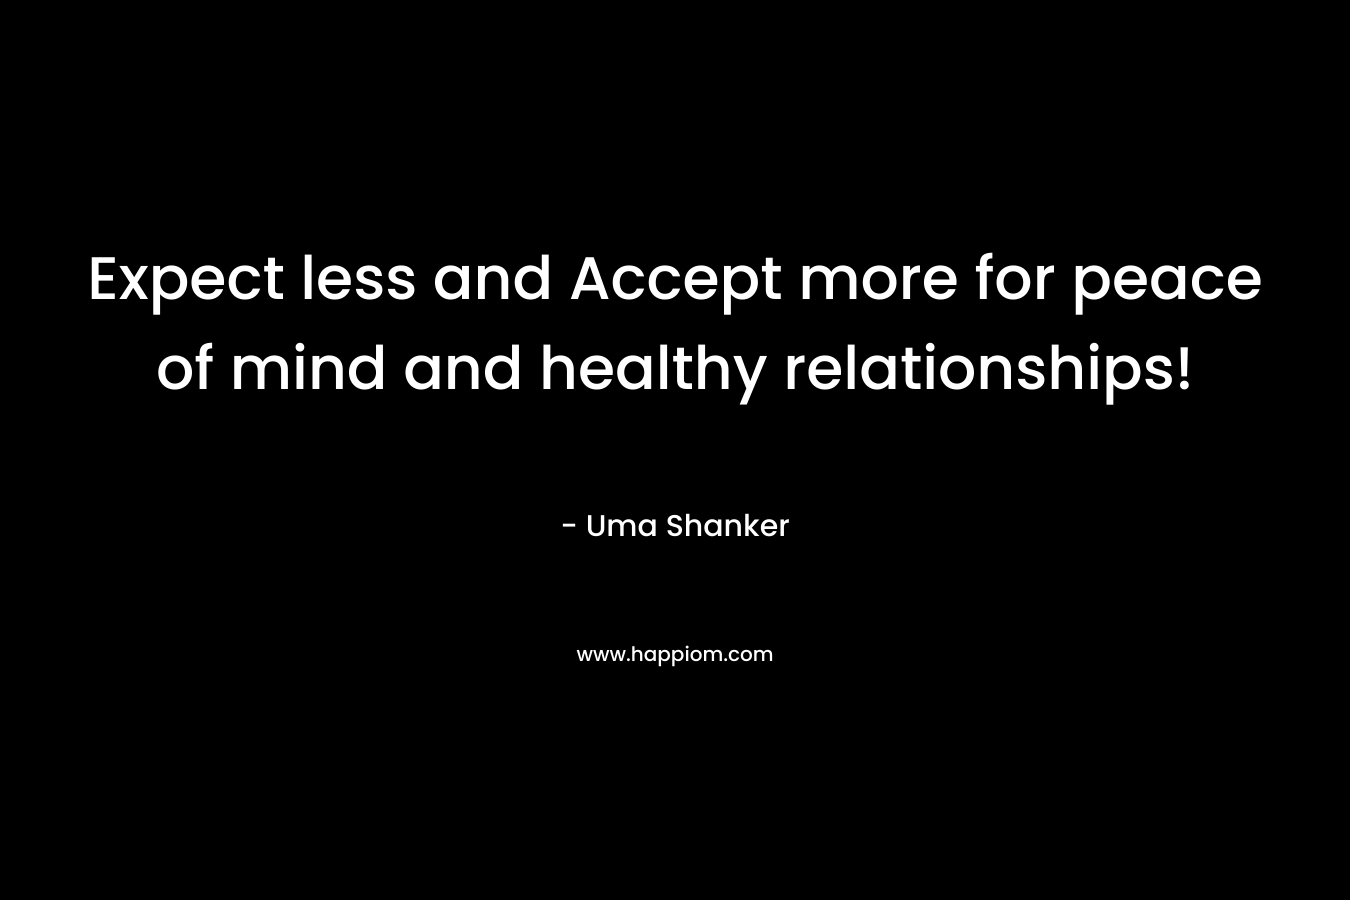 Expect less and Accept more for peace of mind and healthy relationships! – Uma Shanker